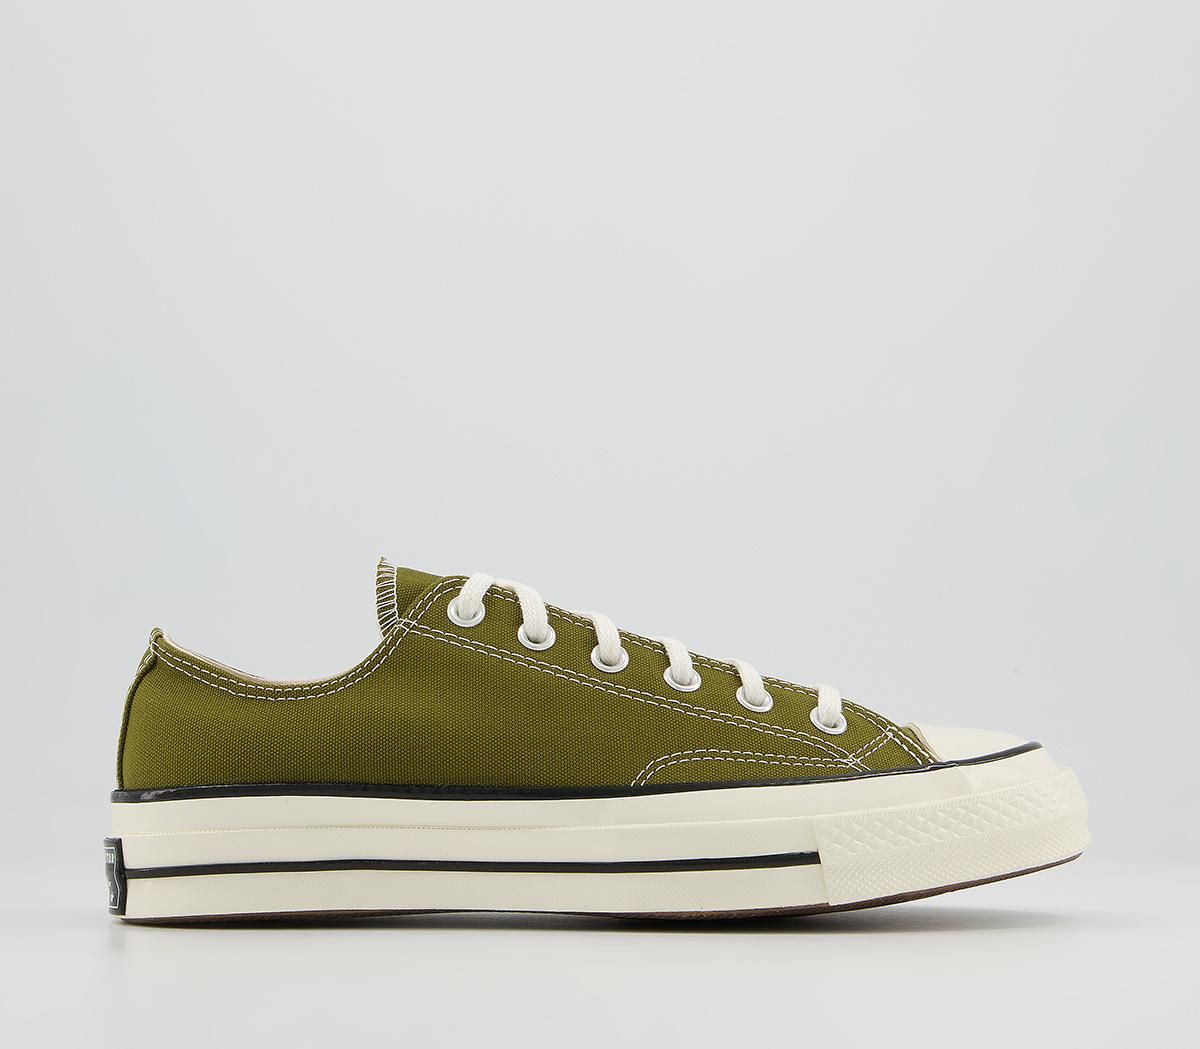 Converse All Star Ox 70s Trainers Dark Moss Egret Black - His trainers | Offspring (UK)